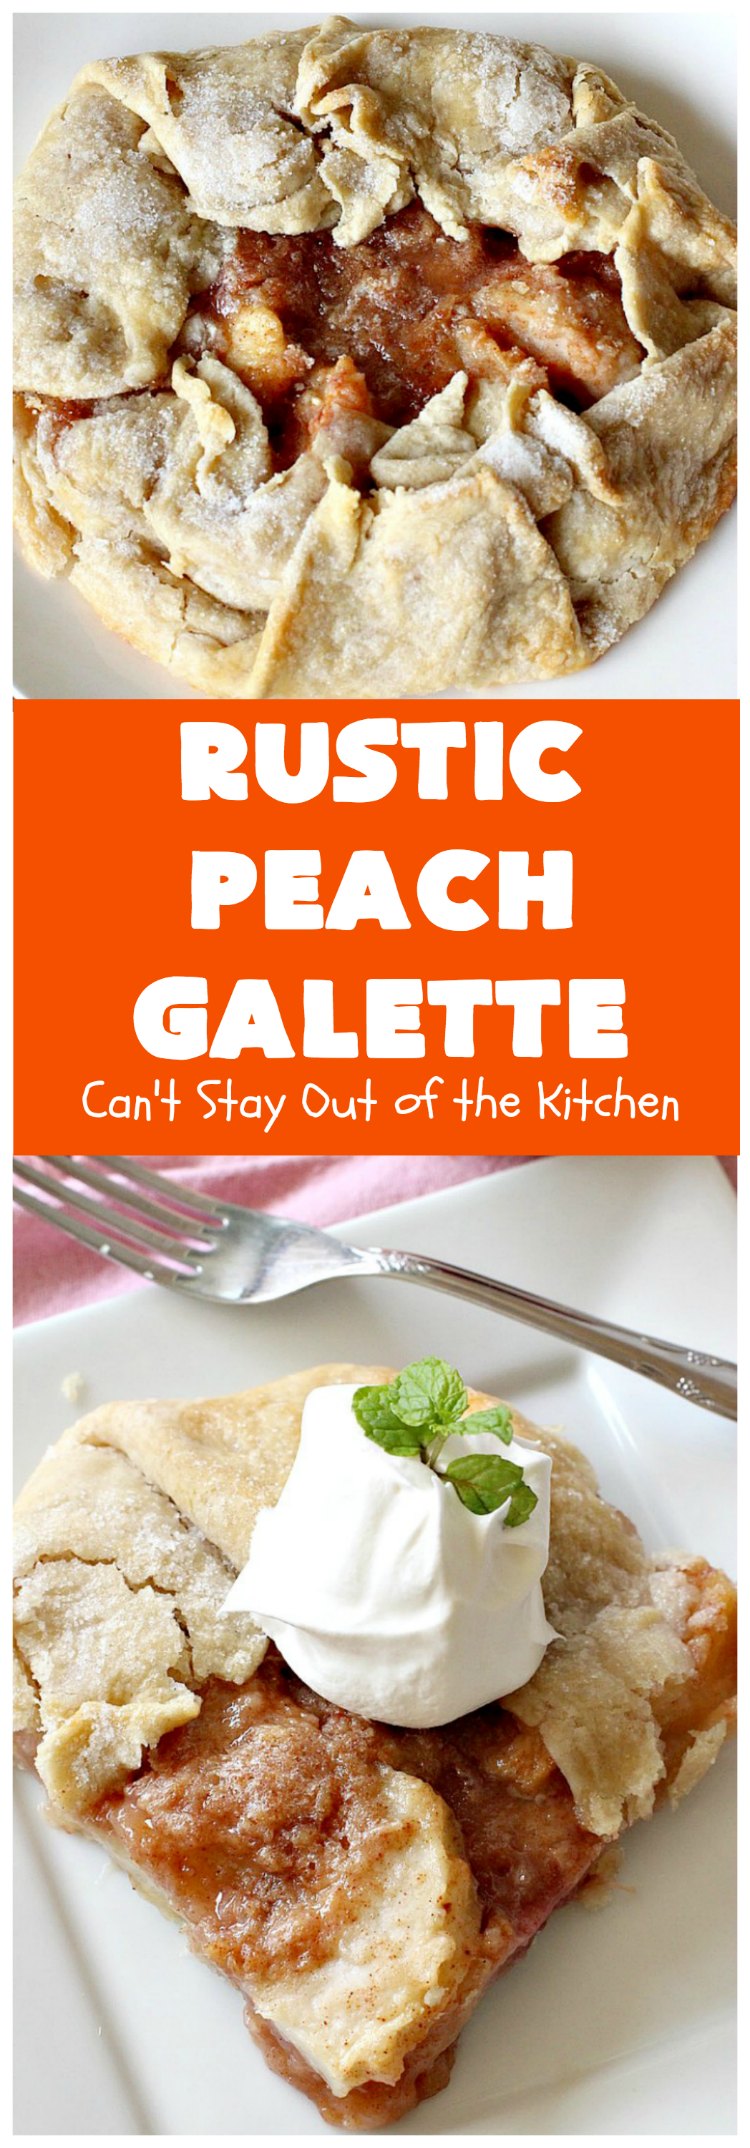 Rustic Peach Galette | Can't Stay Out of the Kitchen